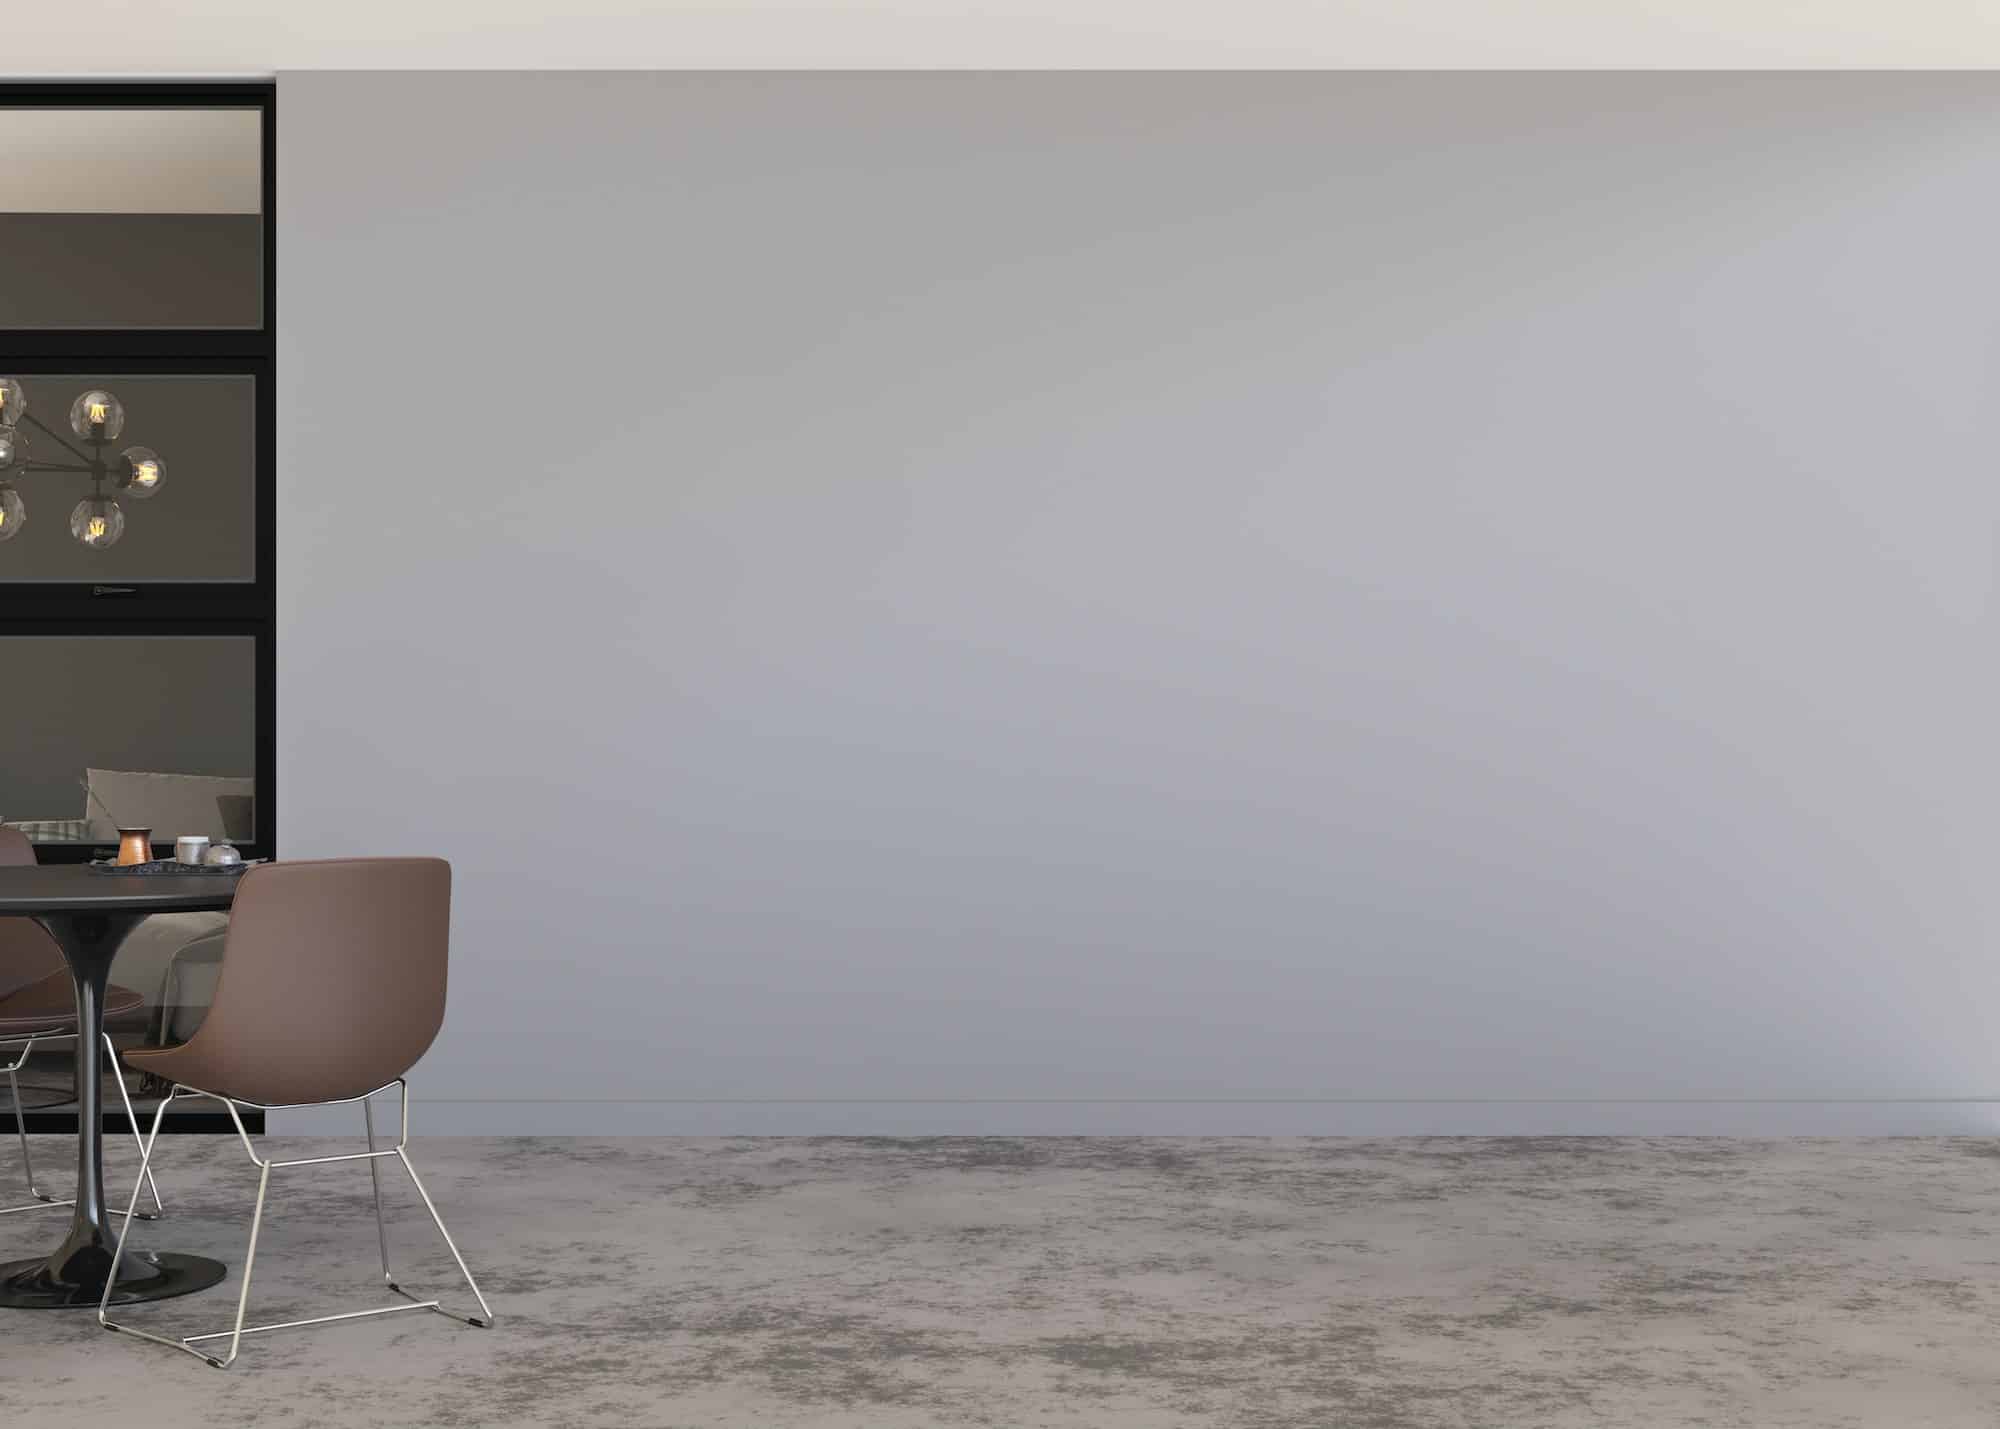 Room with concrete floor, gray wall and empty space. Table with chairs.